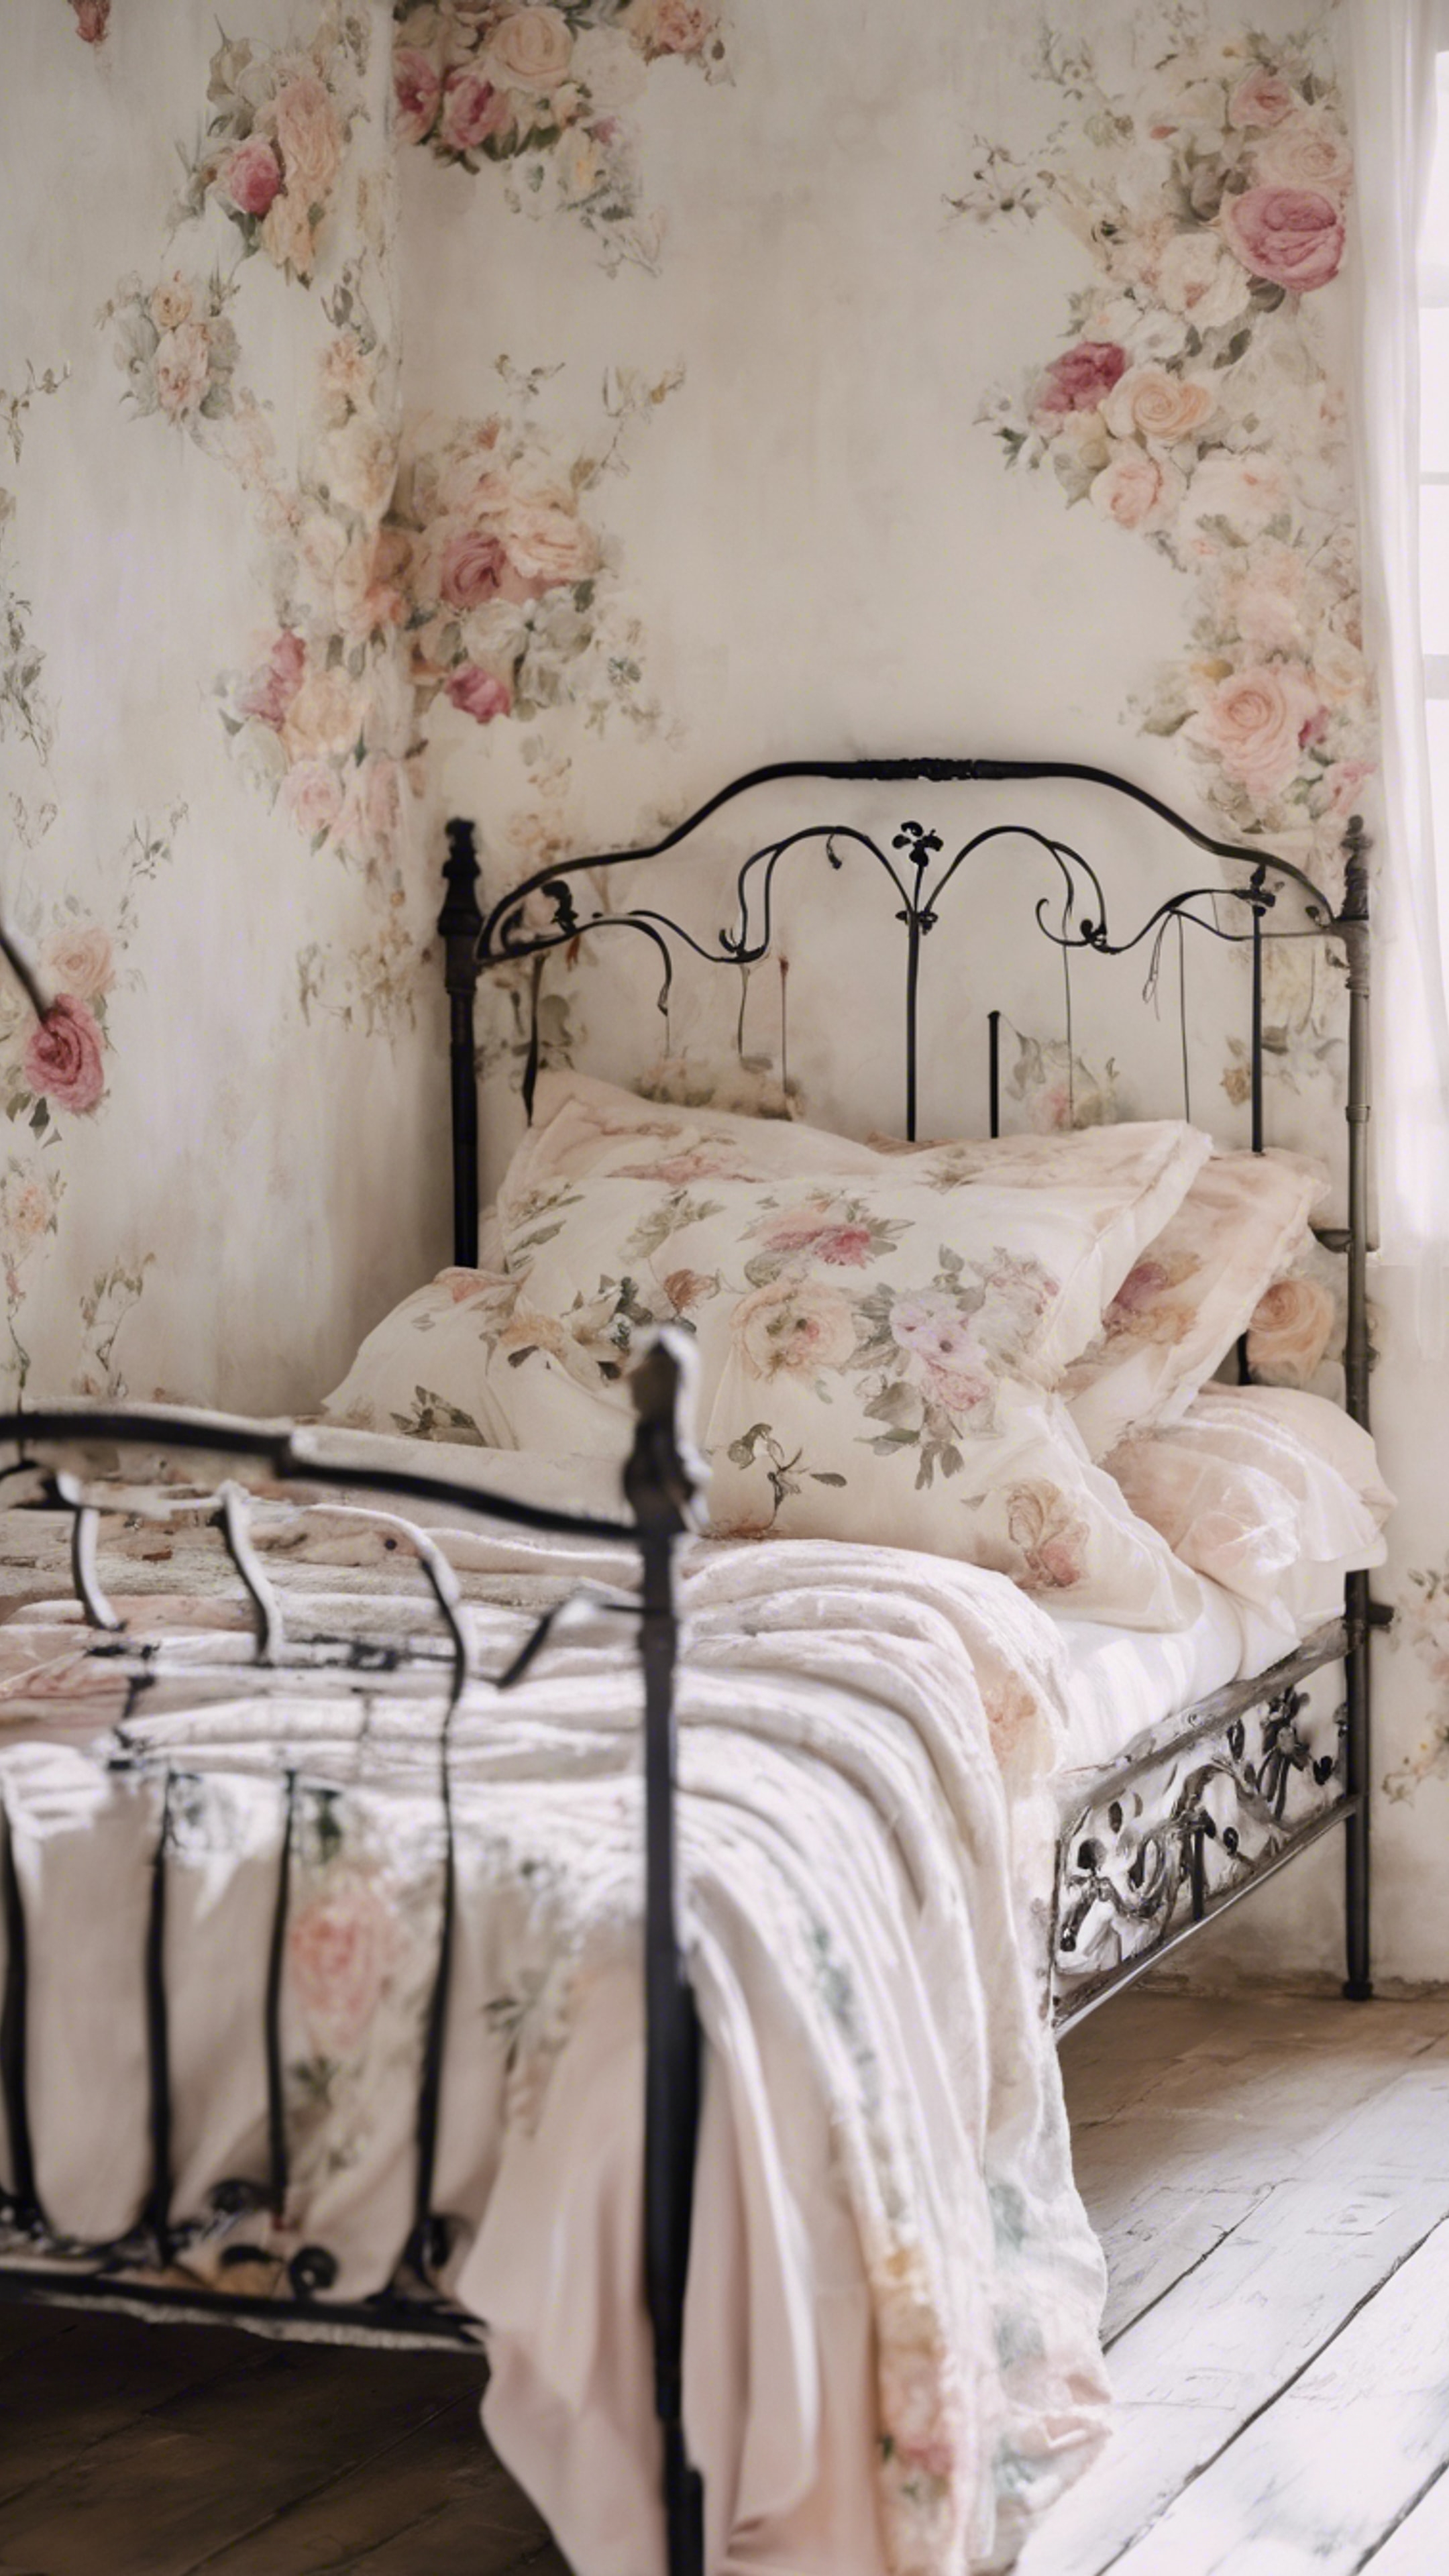 A French country bedroom featuring a wrought-iron bed and pastel floral patterns against whitewashed walls.壁紙[80b94b8799dc4ca6abc7]